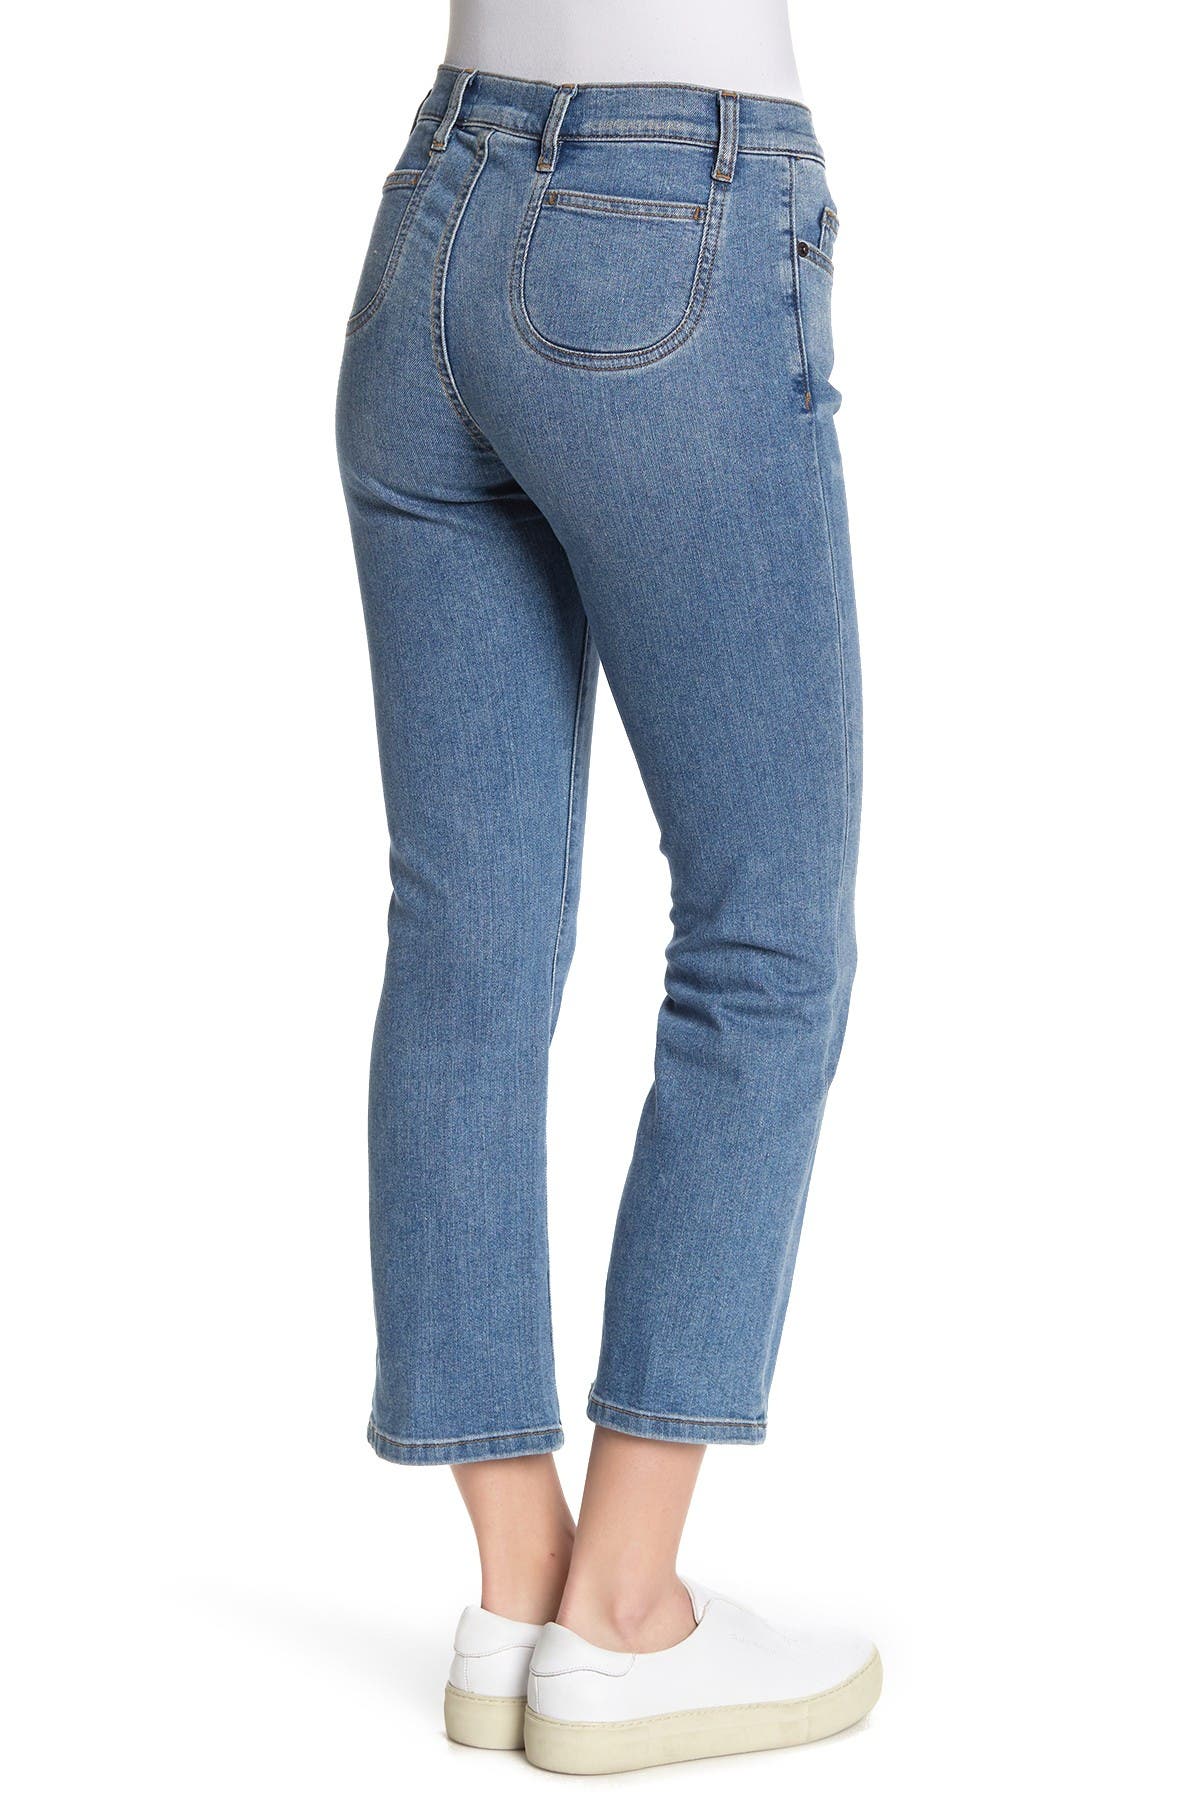 Current/Elliott The Scooped Ruby Crop Jeans - Size 2